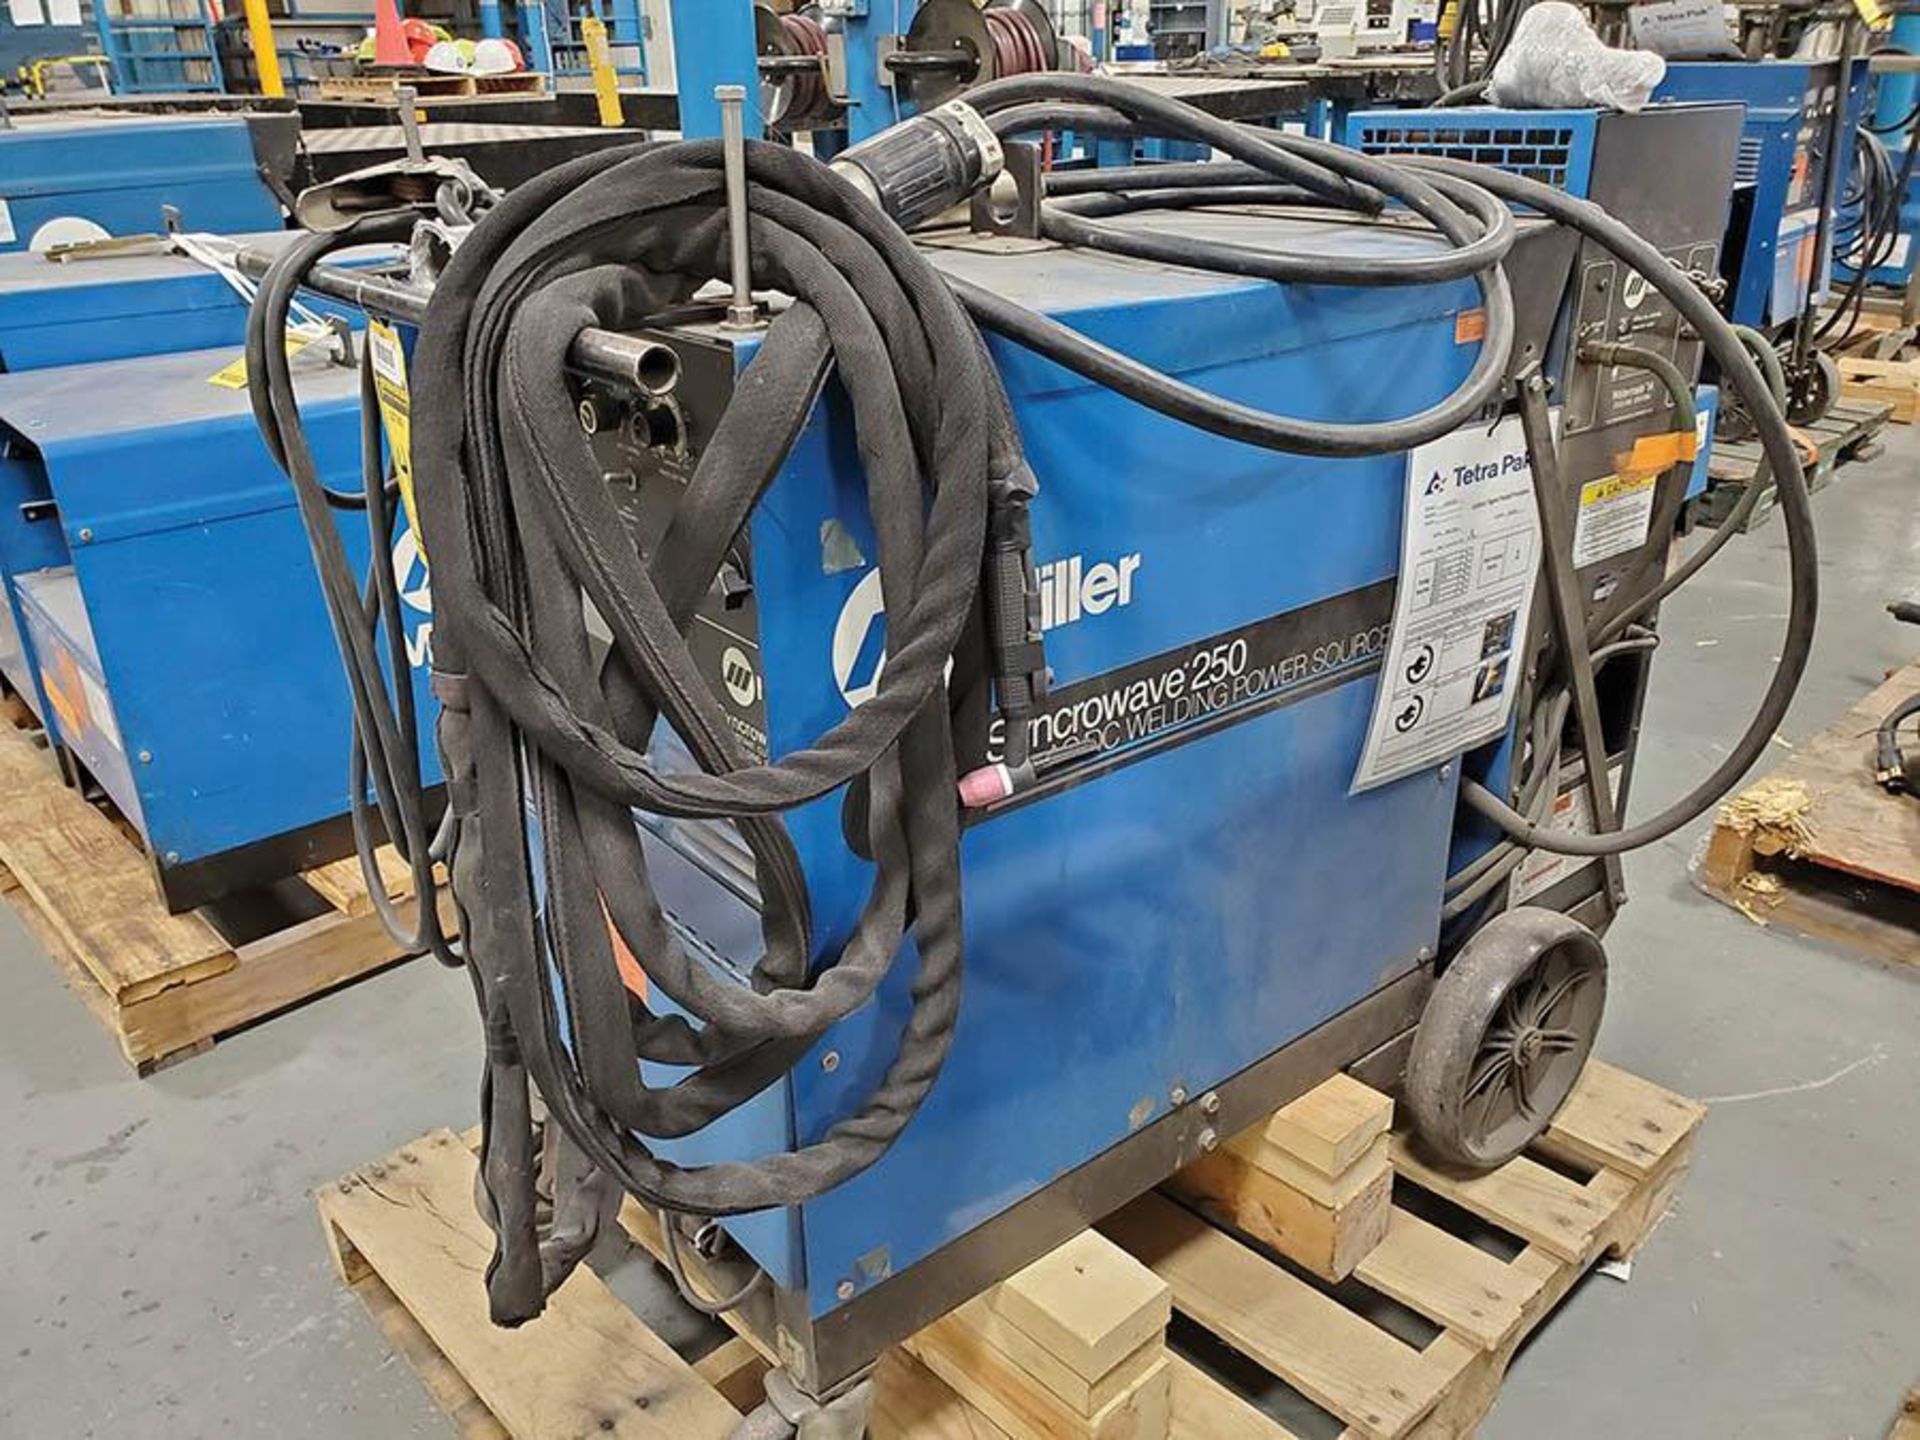 MILLER SYNCROWAVE 250 CC-AC/DC WELDER ON CART WITH WATERMATE 1 COOLING SYSTEM